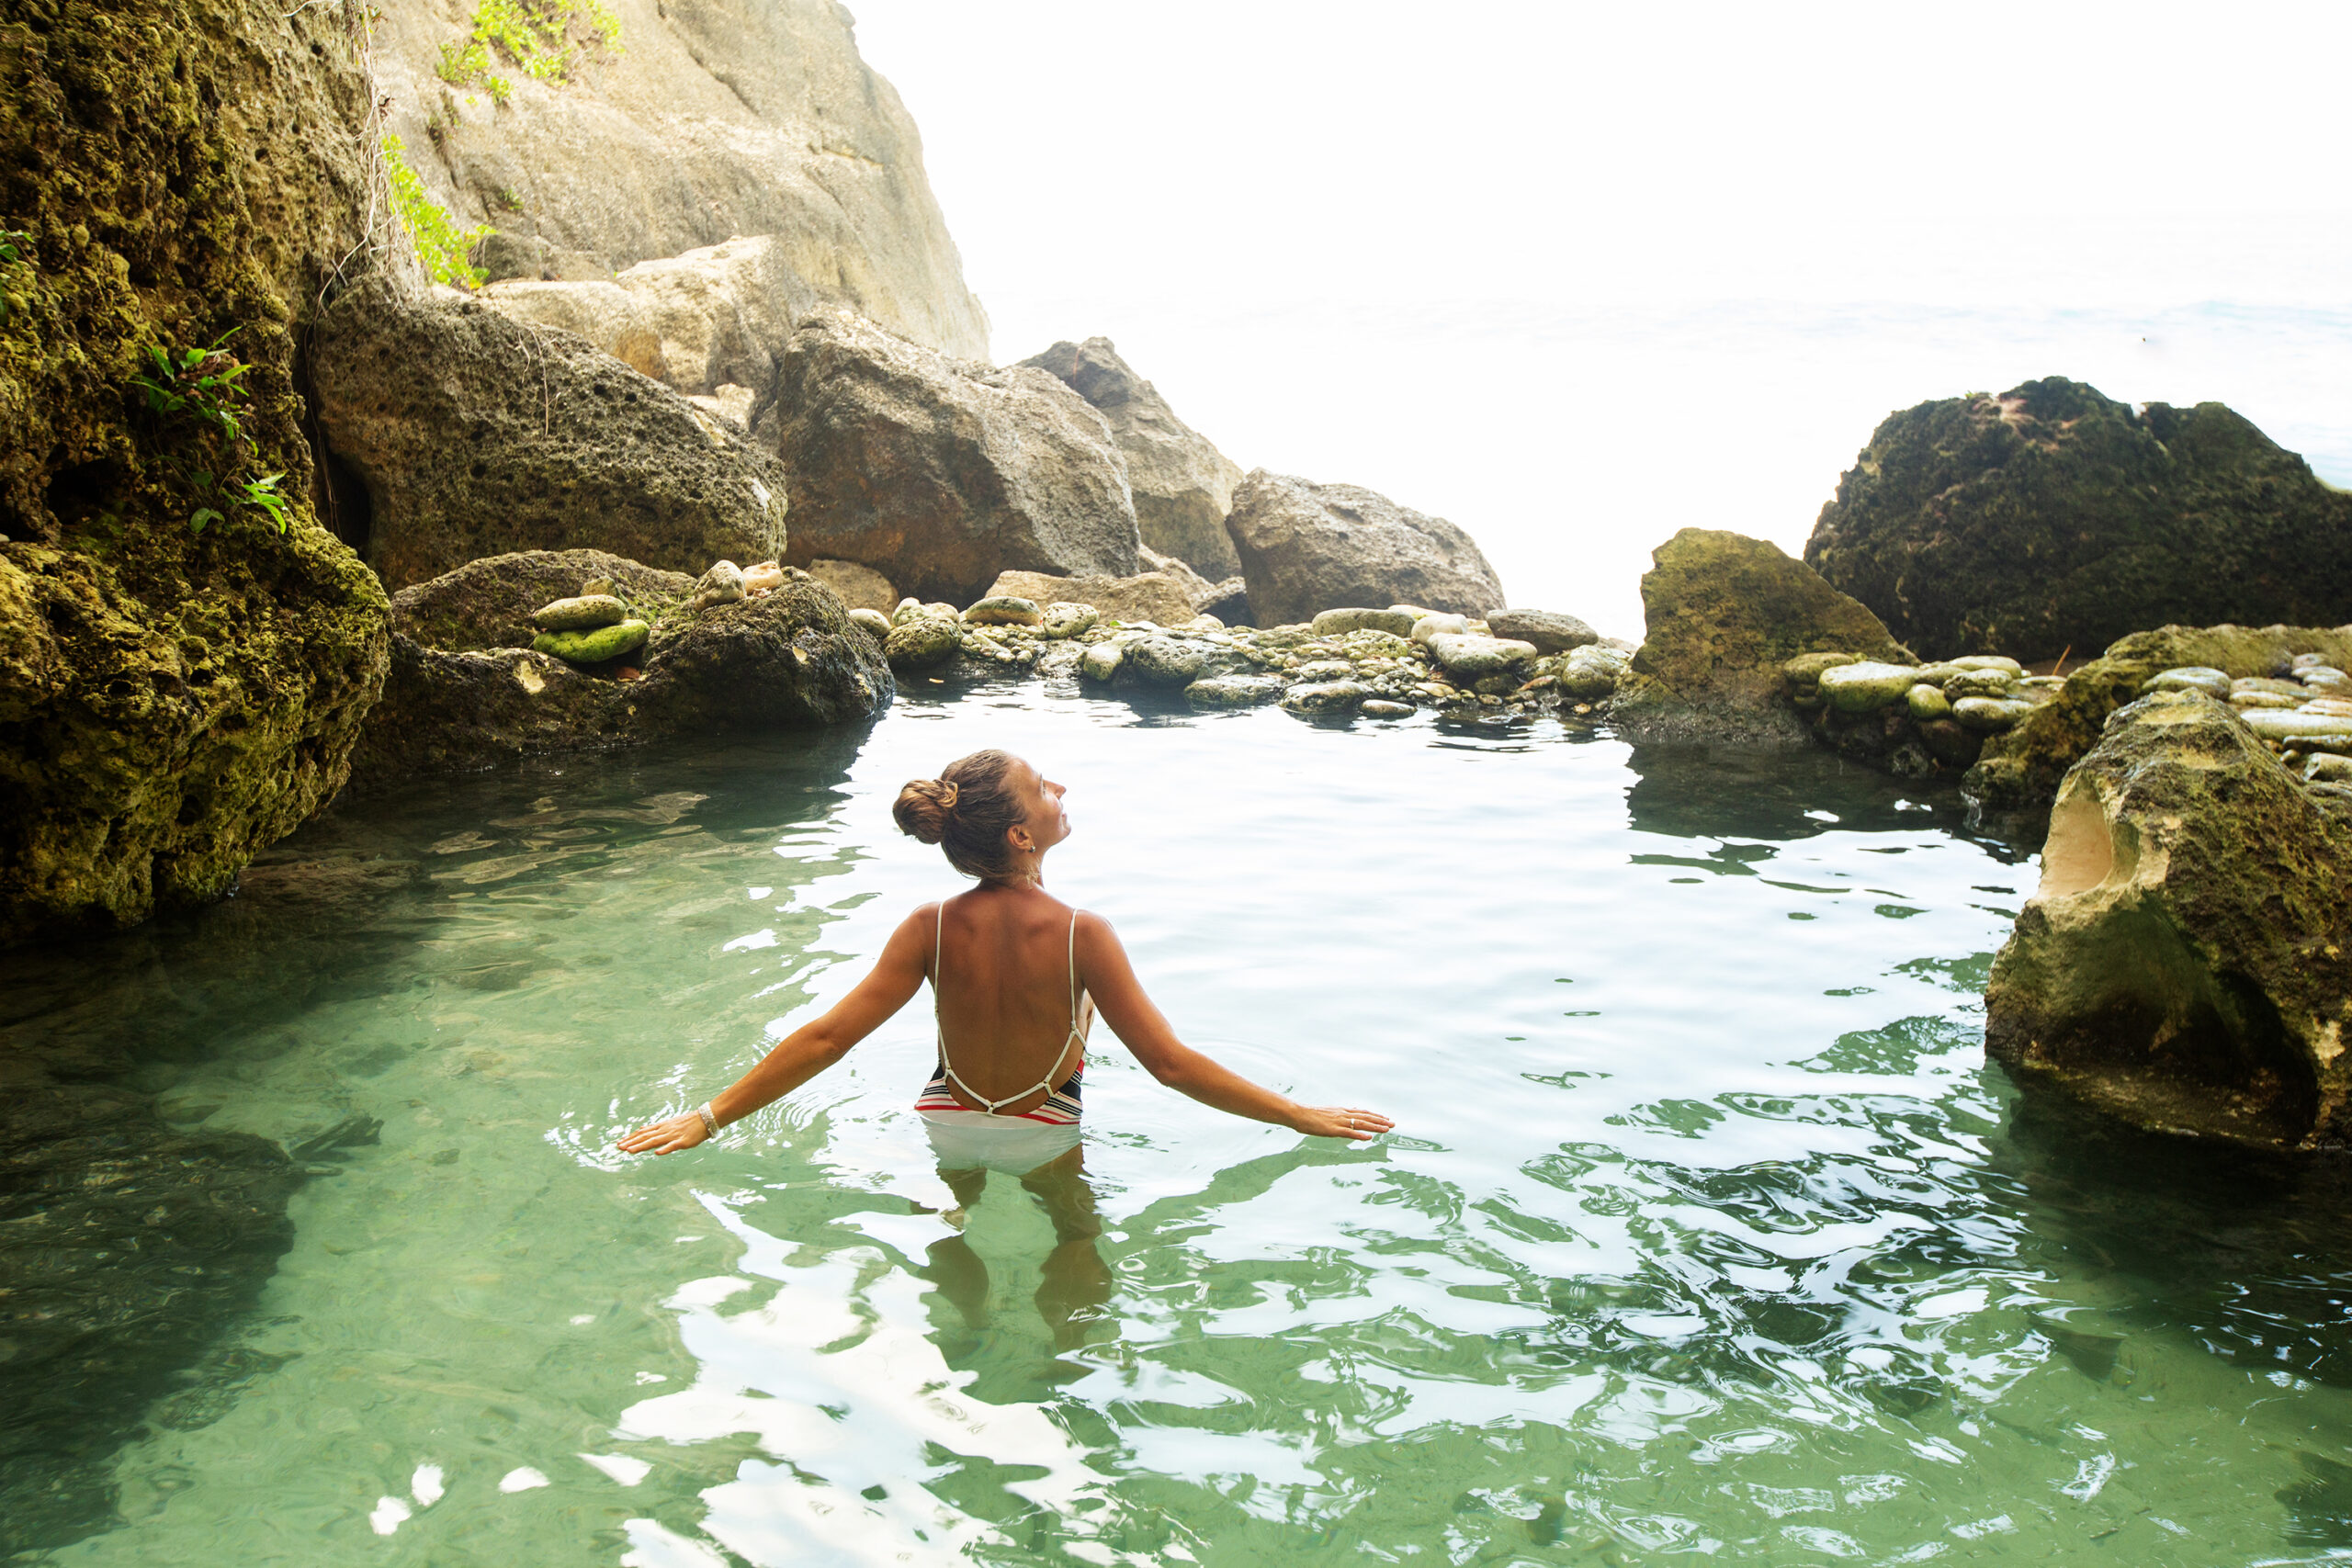 A woman joyfully enjoying an eco-friendly pool surrounded by natural rocks, immersing herself in a tranquil and environmentally conscious poolside experience